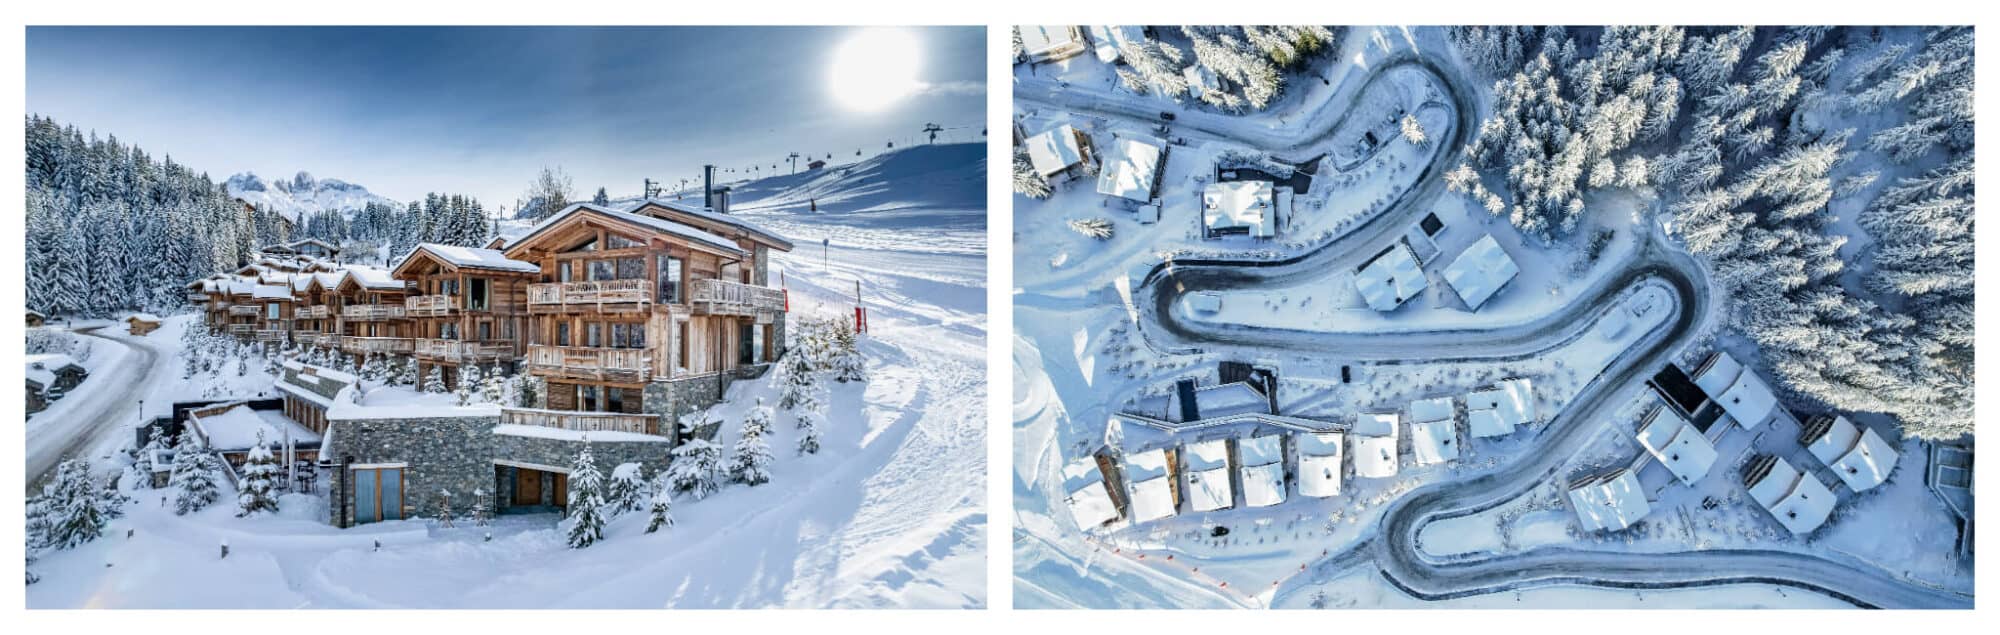 Left: The exterior of Ultima Belvedere's ski chalets in Courchevel, surrounded by snow and pine trees. Right: An overhead view of the swirling roads and snow mountains and pine trees that surround Ultima.